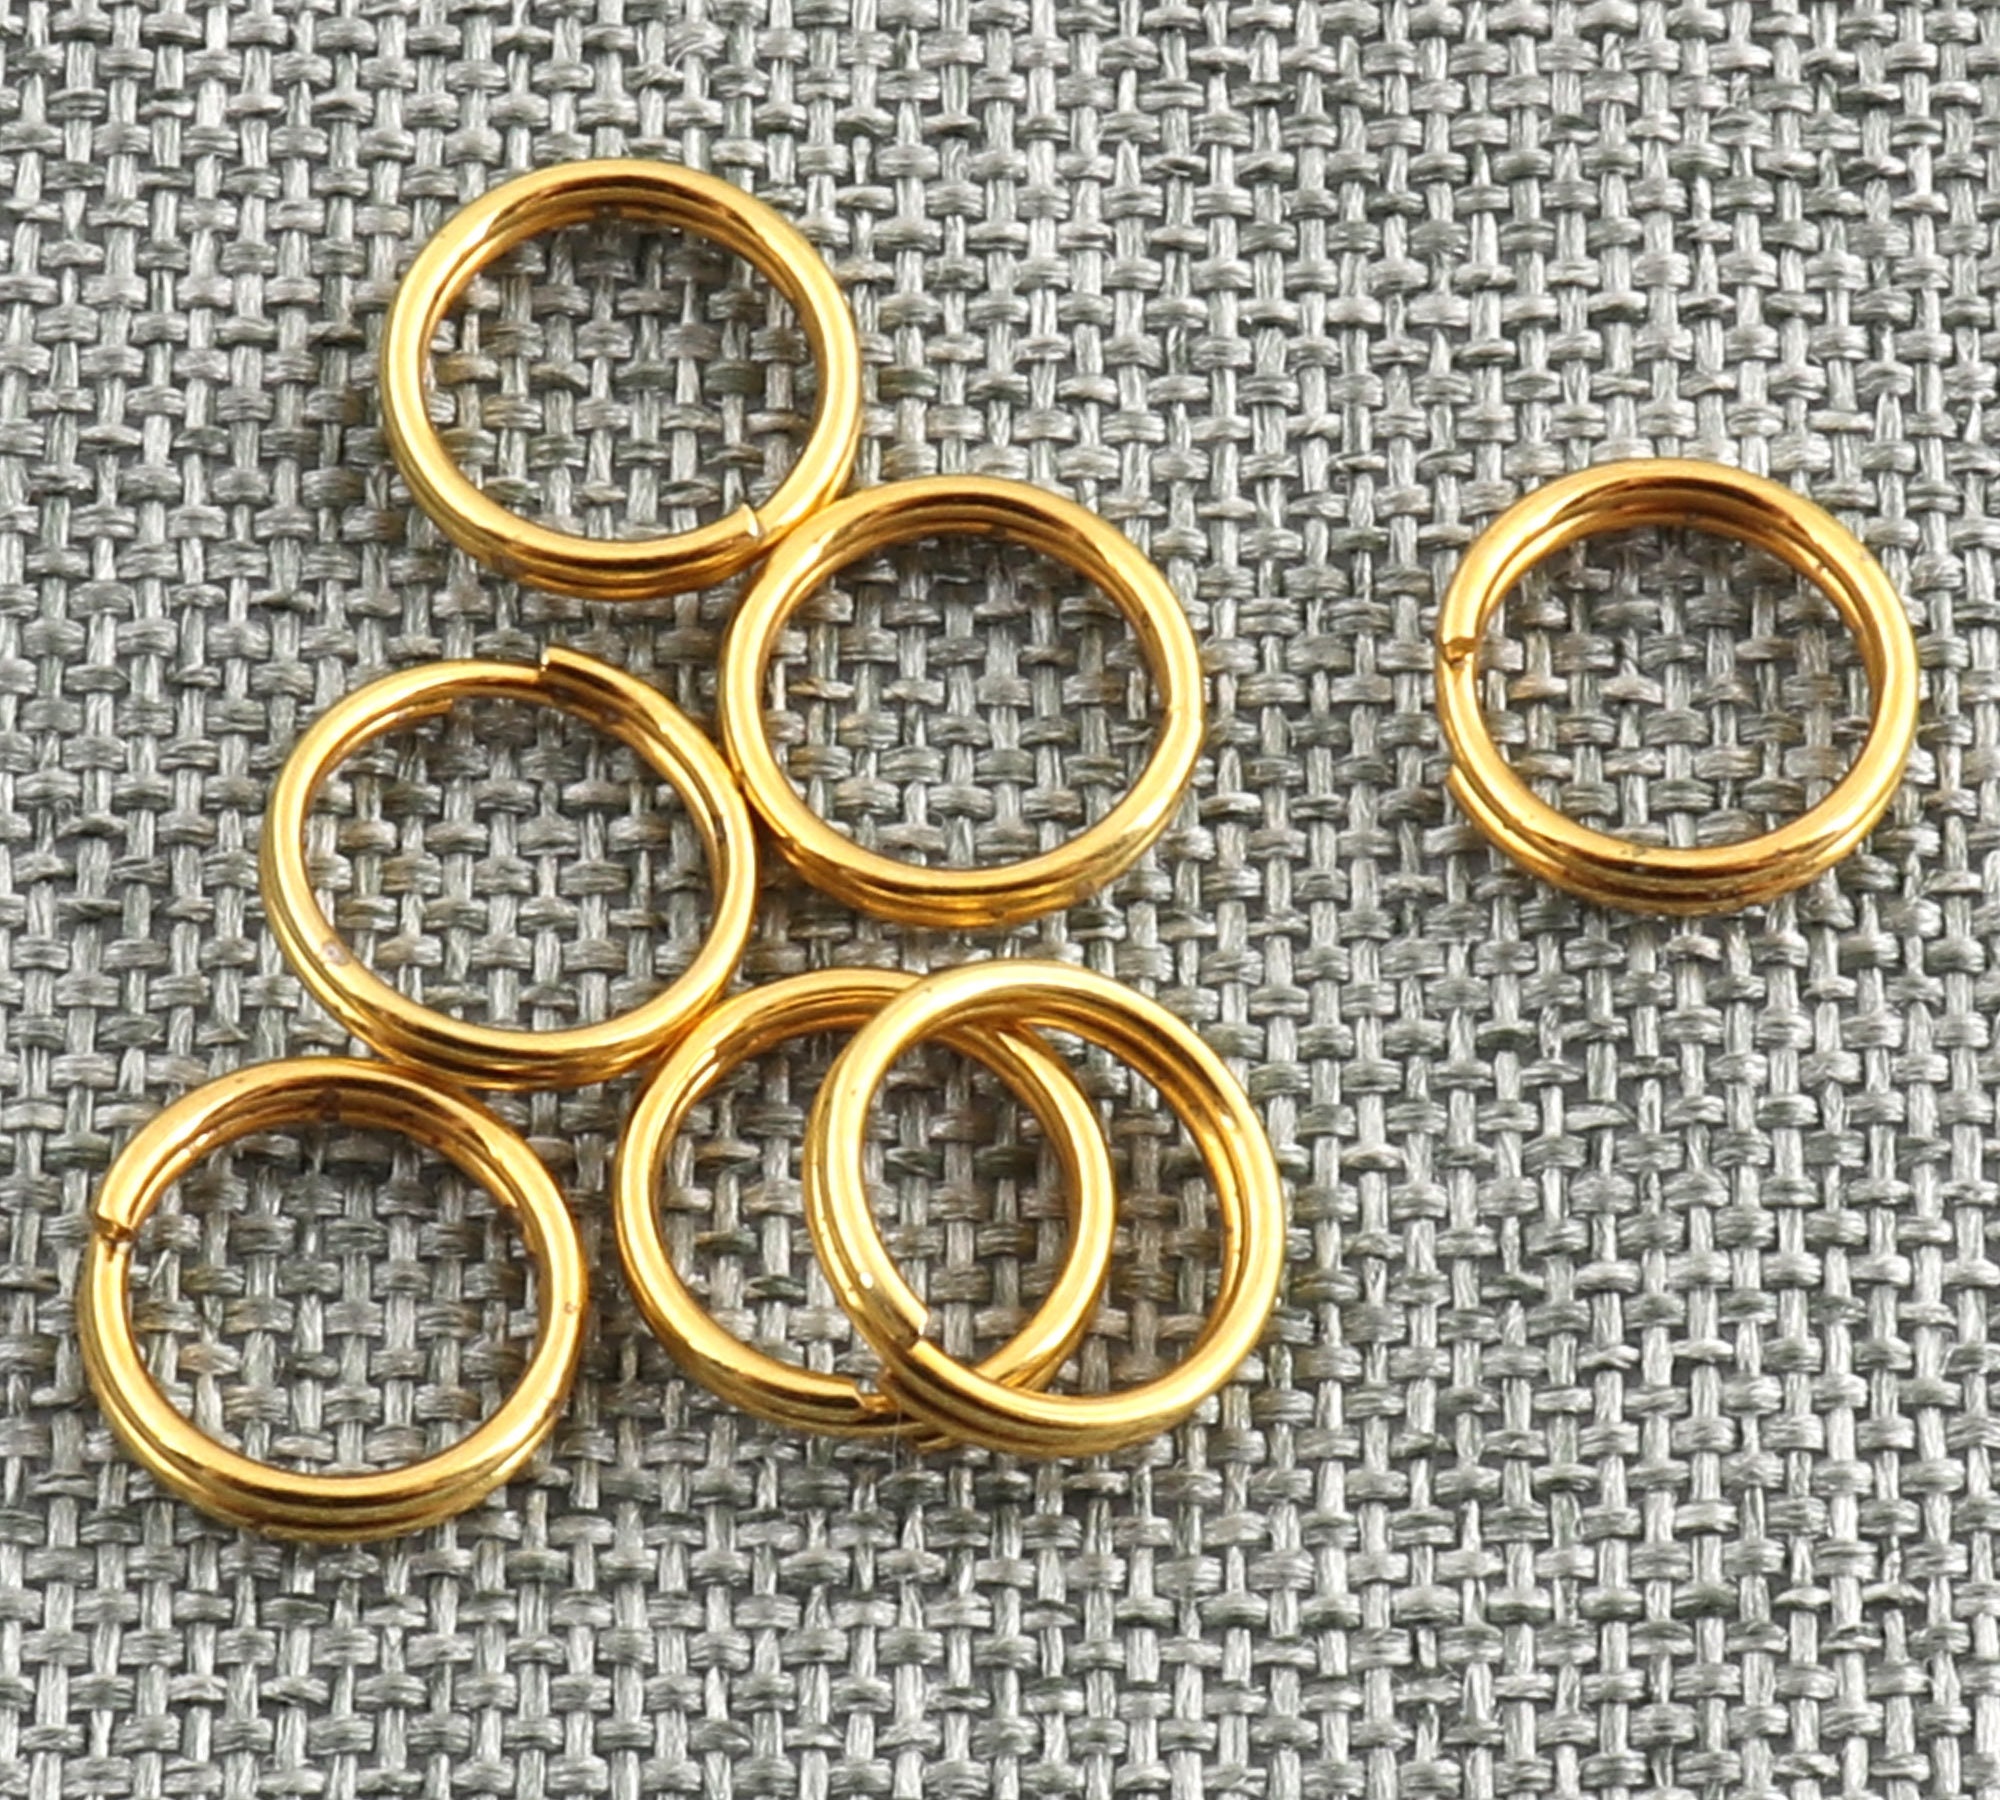 500 pcs Gold Plated Split Open Jump Rings 10mm Jewelry 23G Findings Ma –  Sweet Crafty Tools